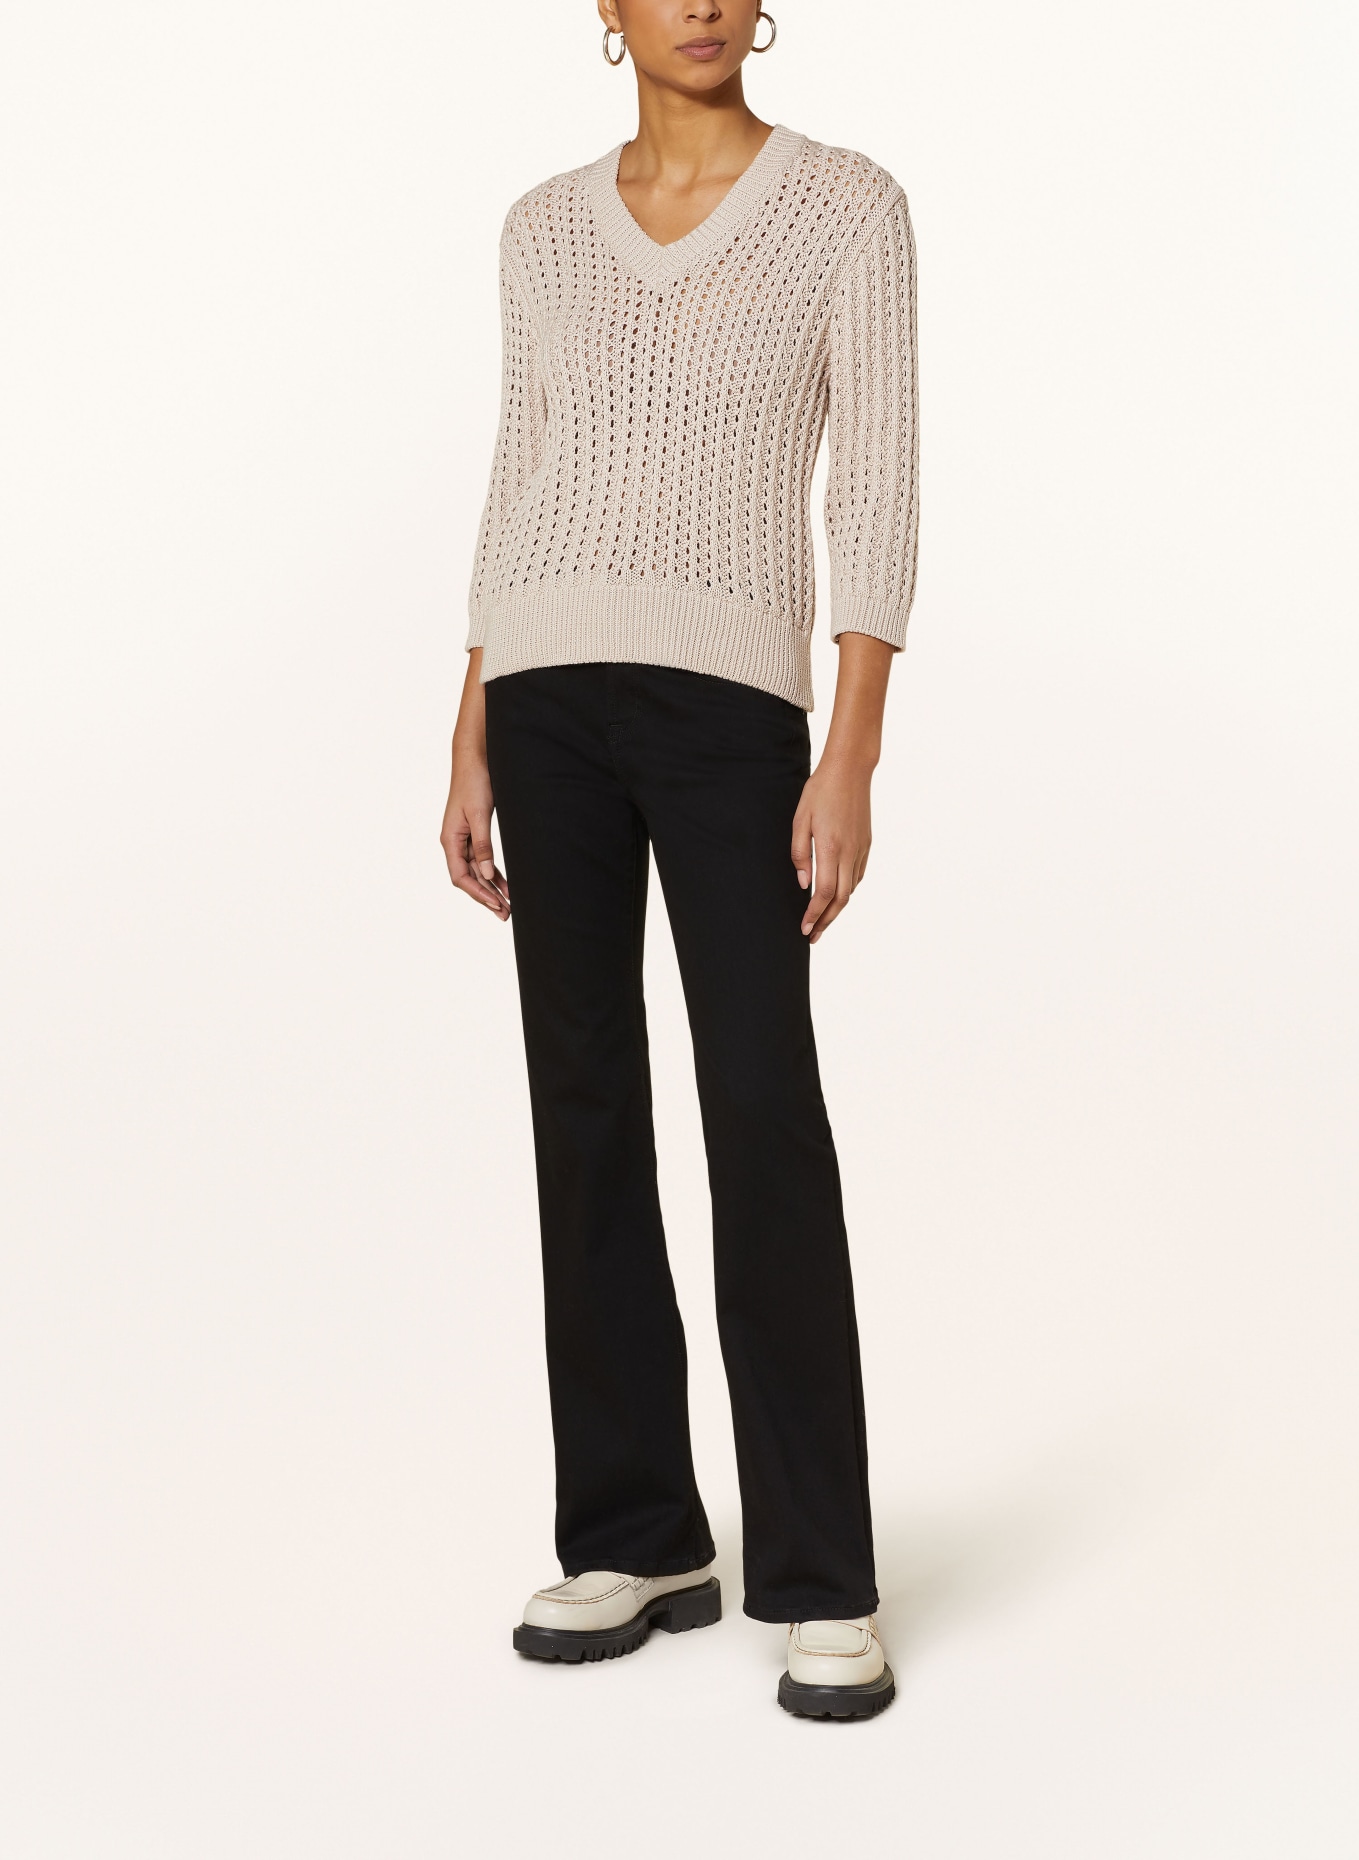 MORE & MORE Sweater with 3/4 sleeves, Color: BEIGE (Image 2)